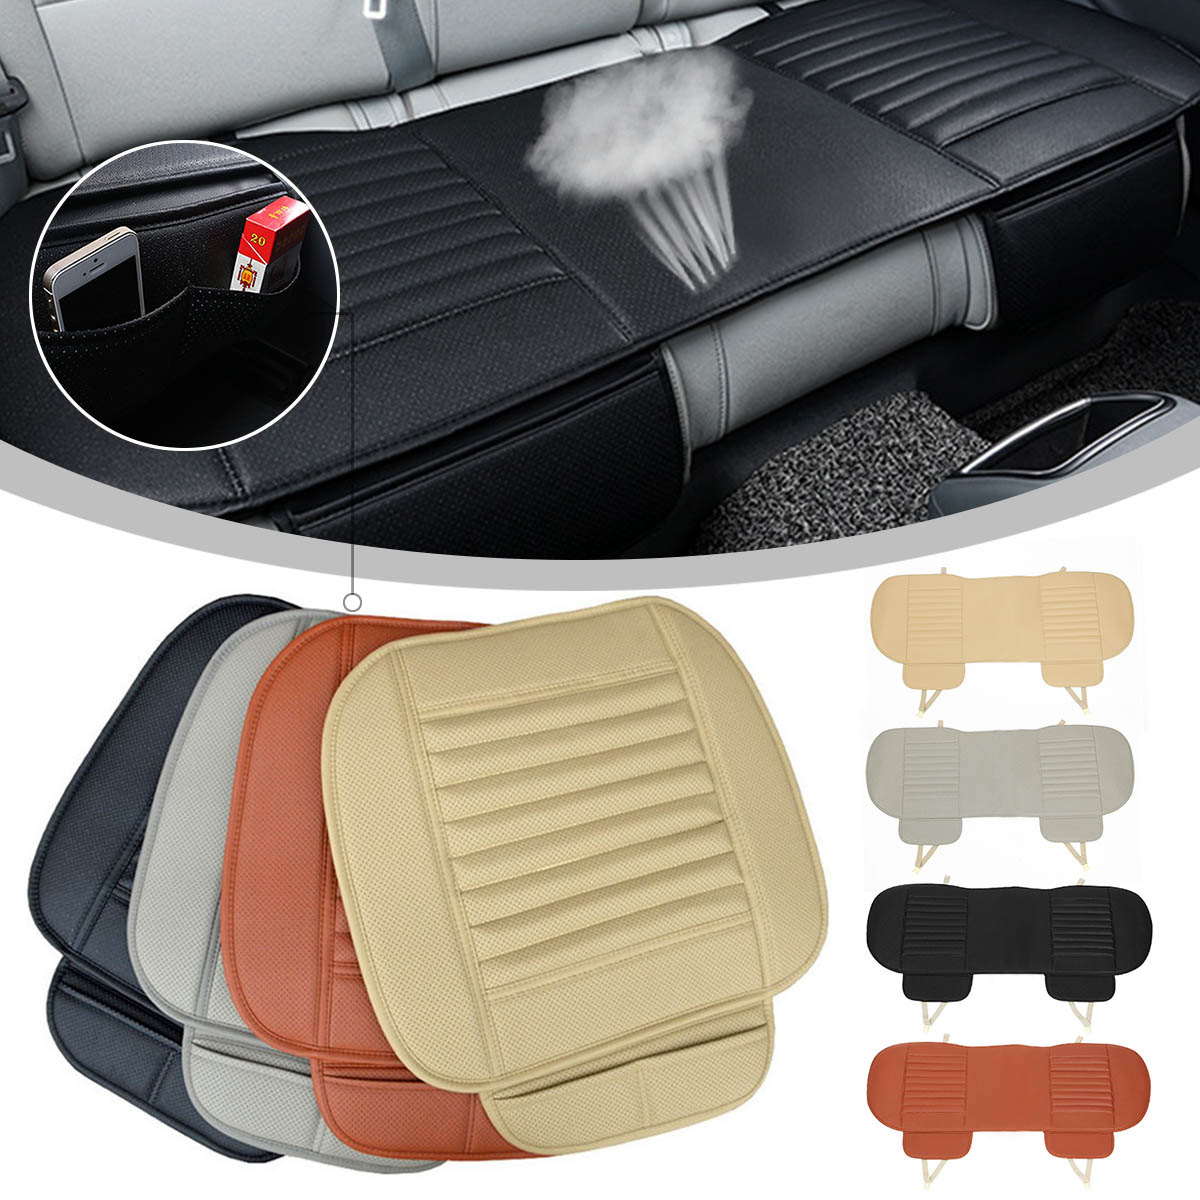 3 pcs 1Rear+2Front Car Universal Seat Cover Bamboo Breathable PU Leather Pad Chair Cushion US - image 1 of 12